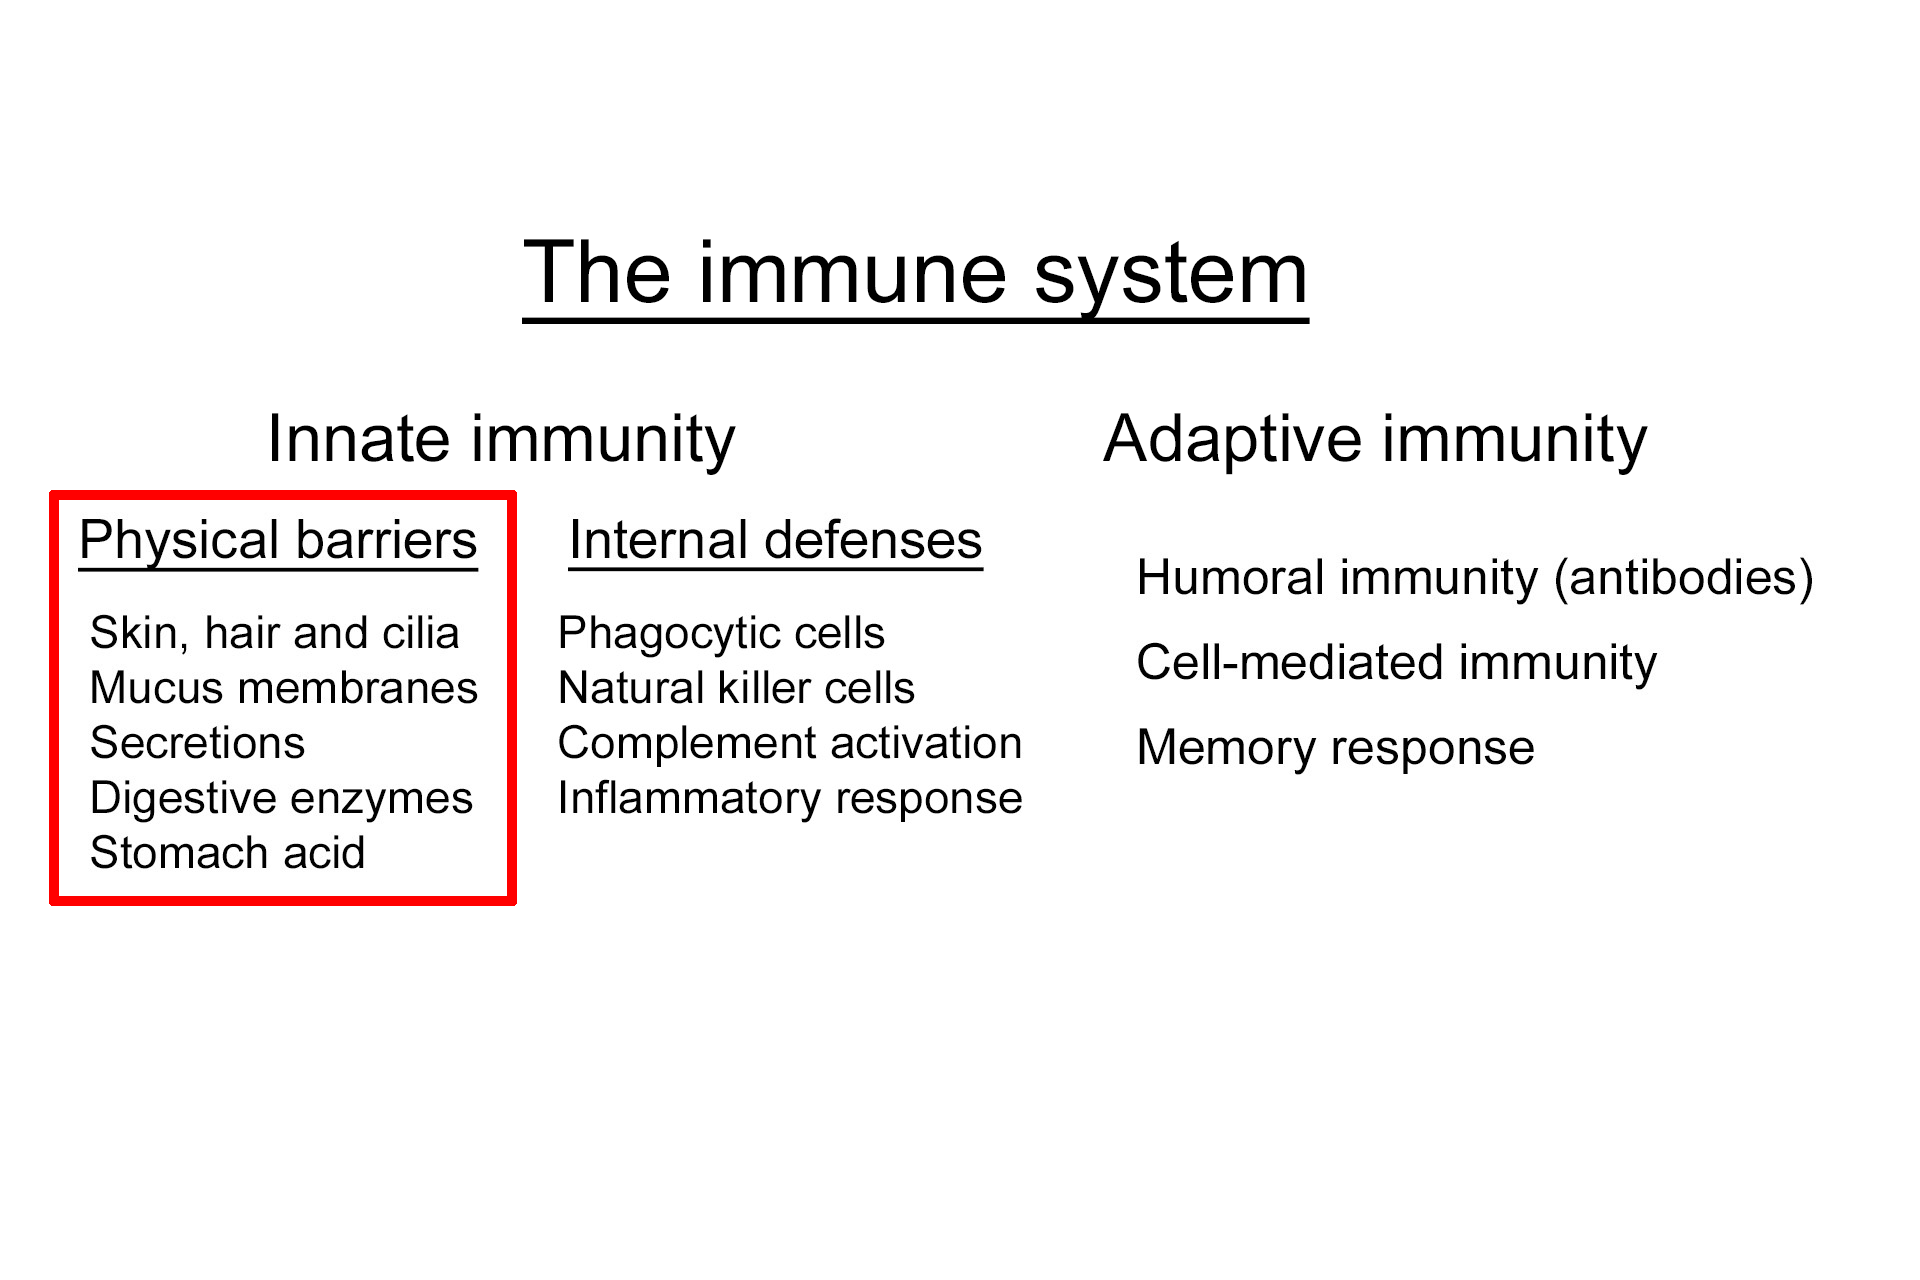  -- Physical barriers >  <p>The innate immune system initially consists of physical barriers to pathogens, such as the skin and mucus membranes, as well as chemical defenses including digestive enzymes and stomach acid that destroy microorganisms.</p>
